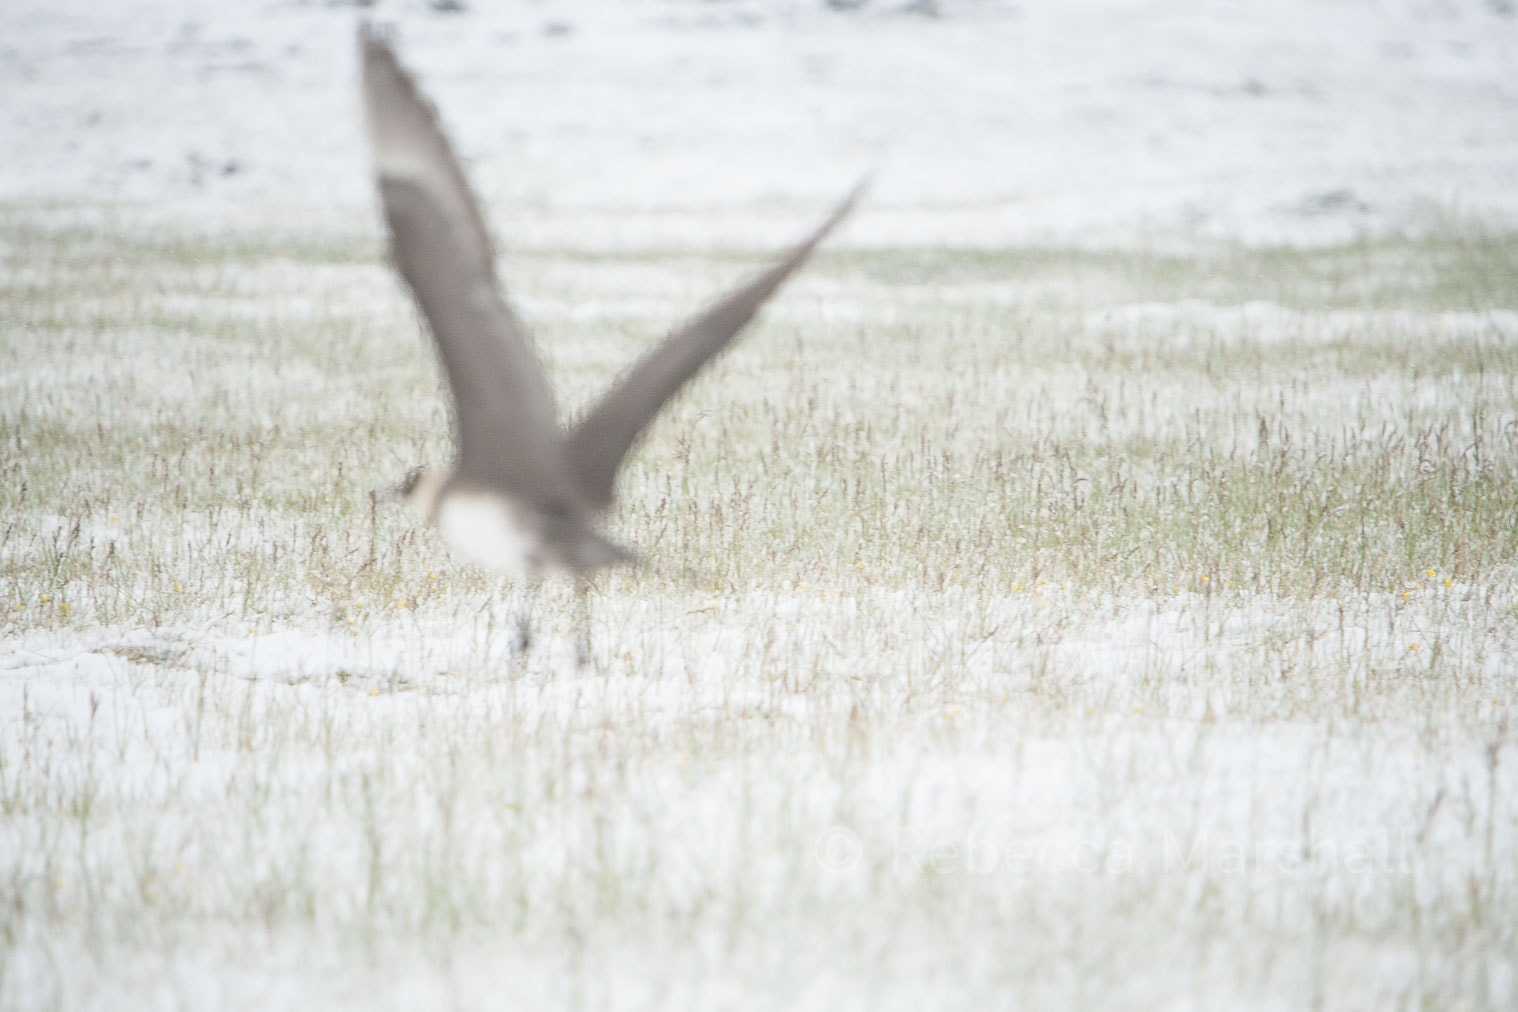 Photograph of a seabird, out of focus, flying over snow and grasses